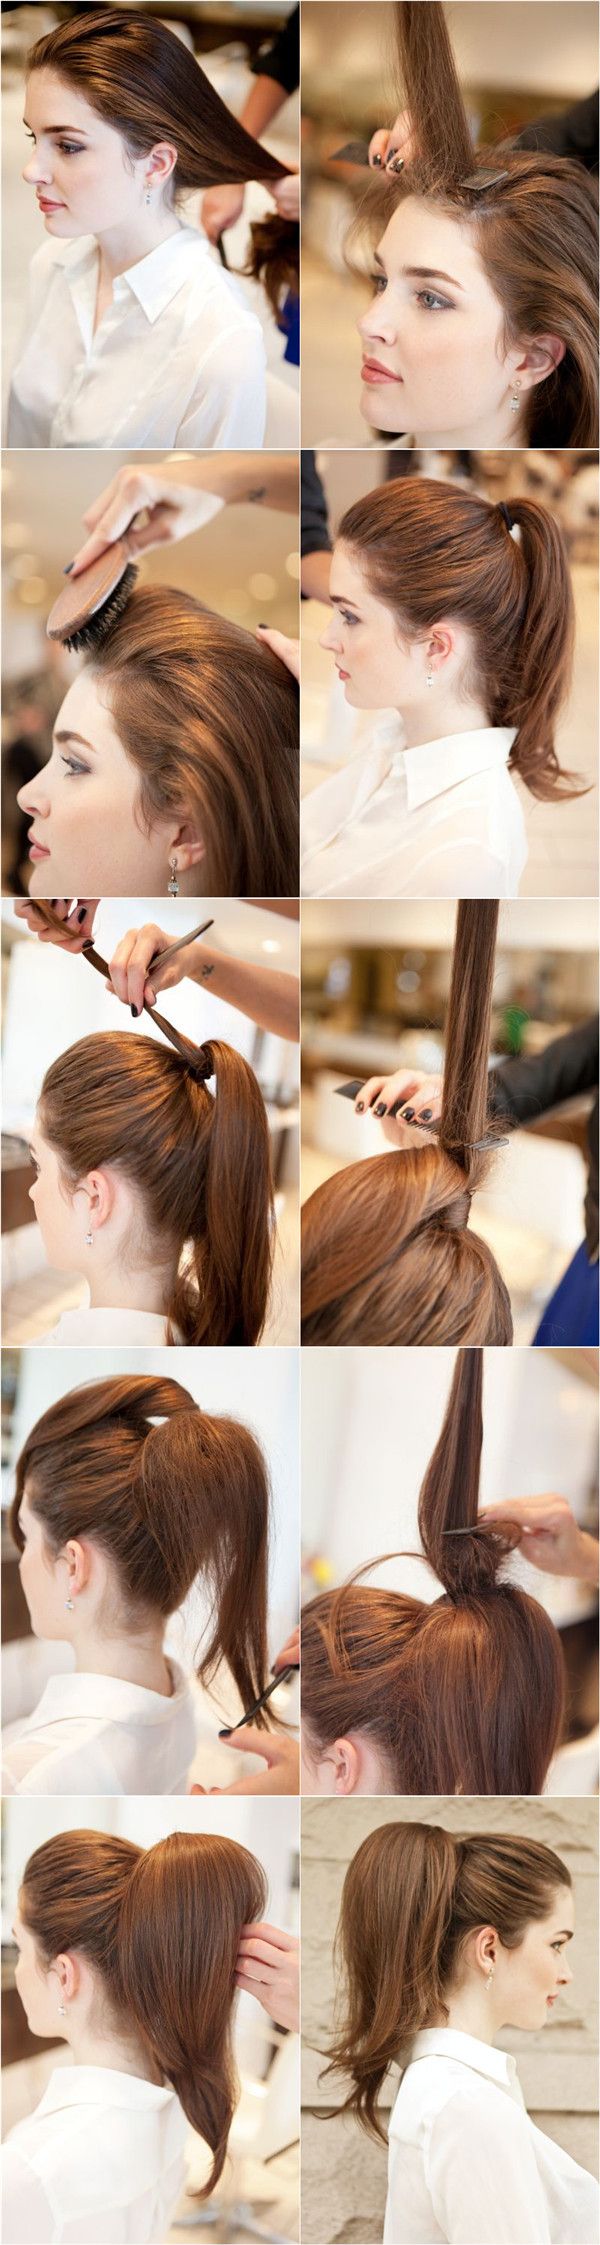 5 Hacks and Tutorials On How To Make A Fuller Ponytail